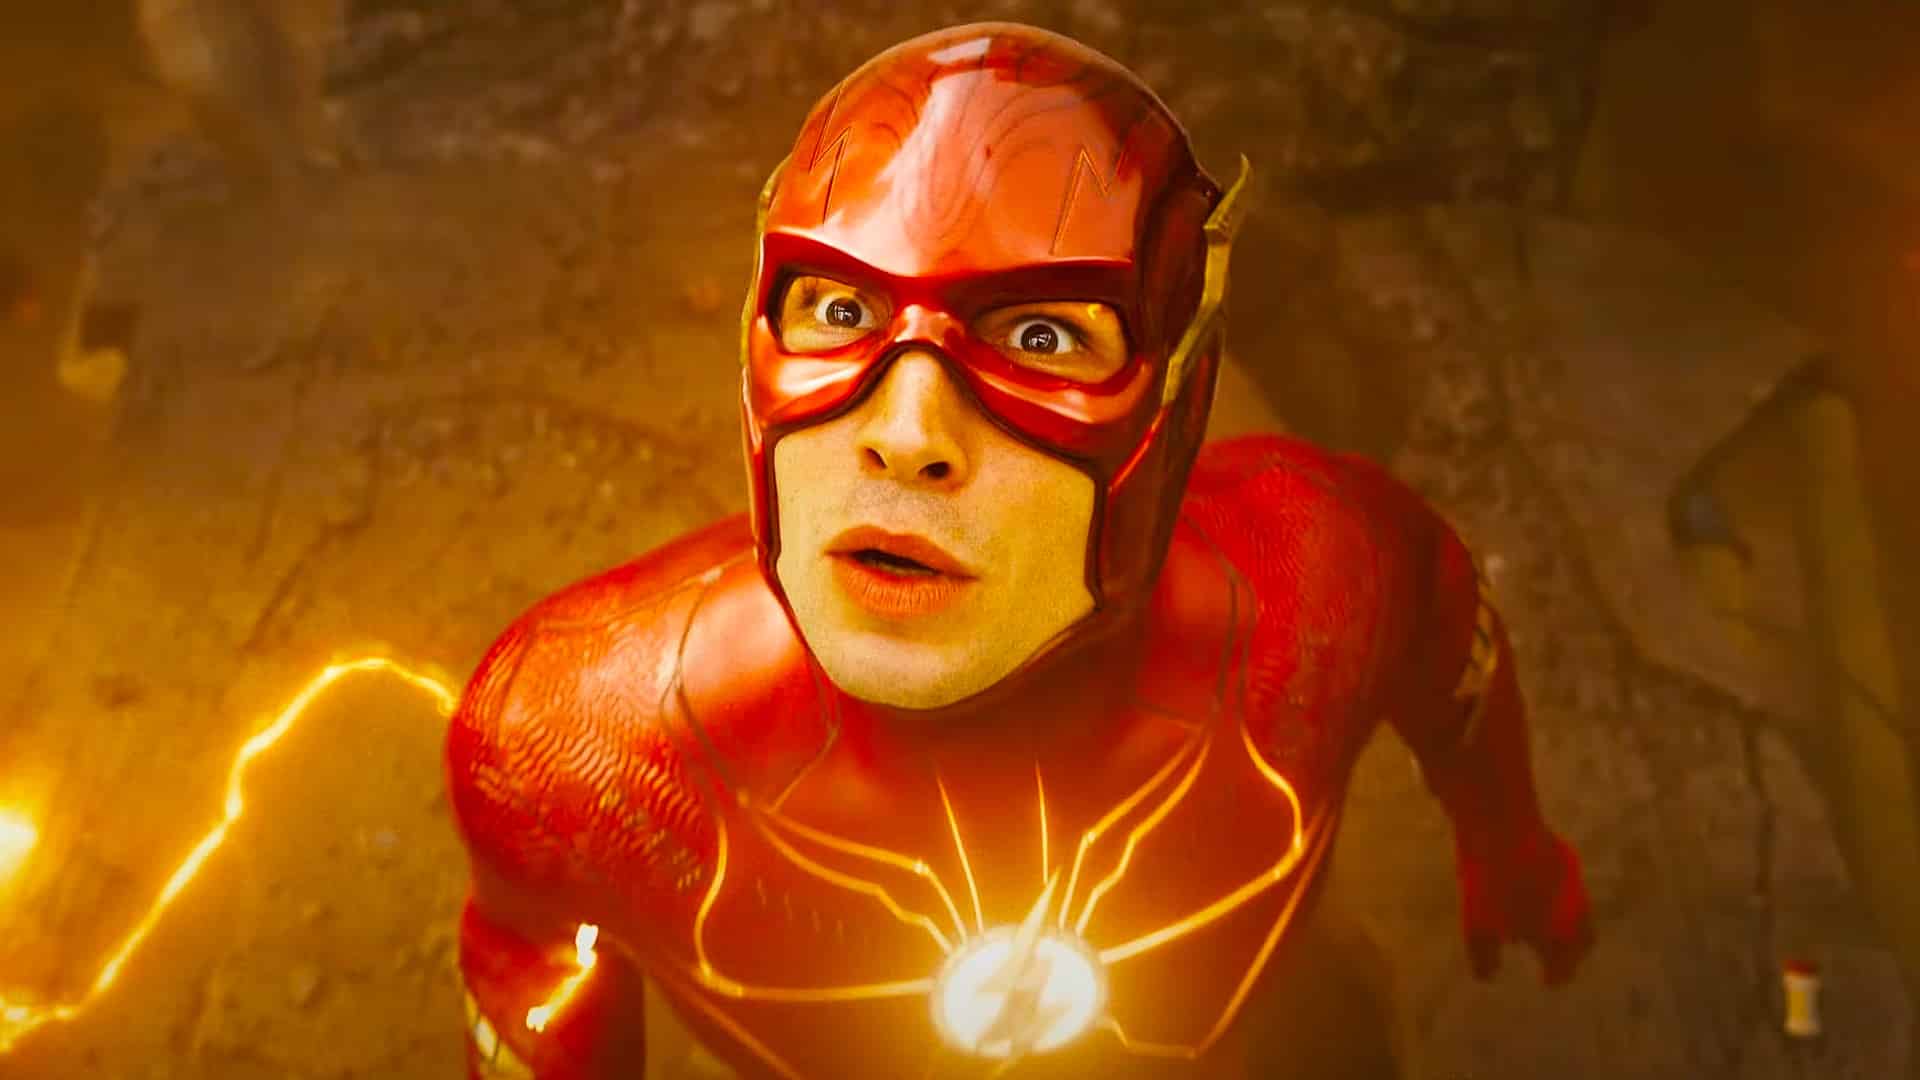 We Asked a Fortune Teller About The Flash Movie